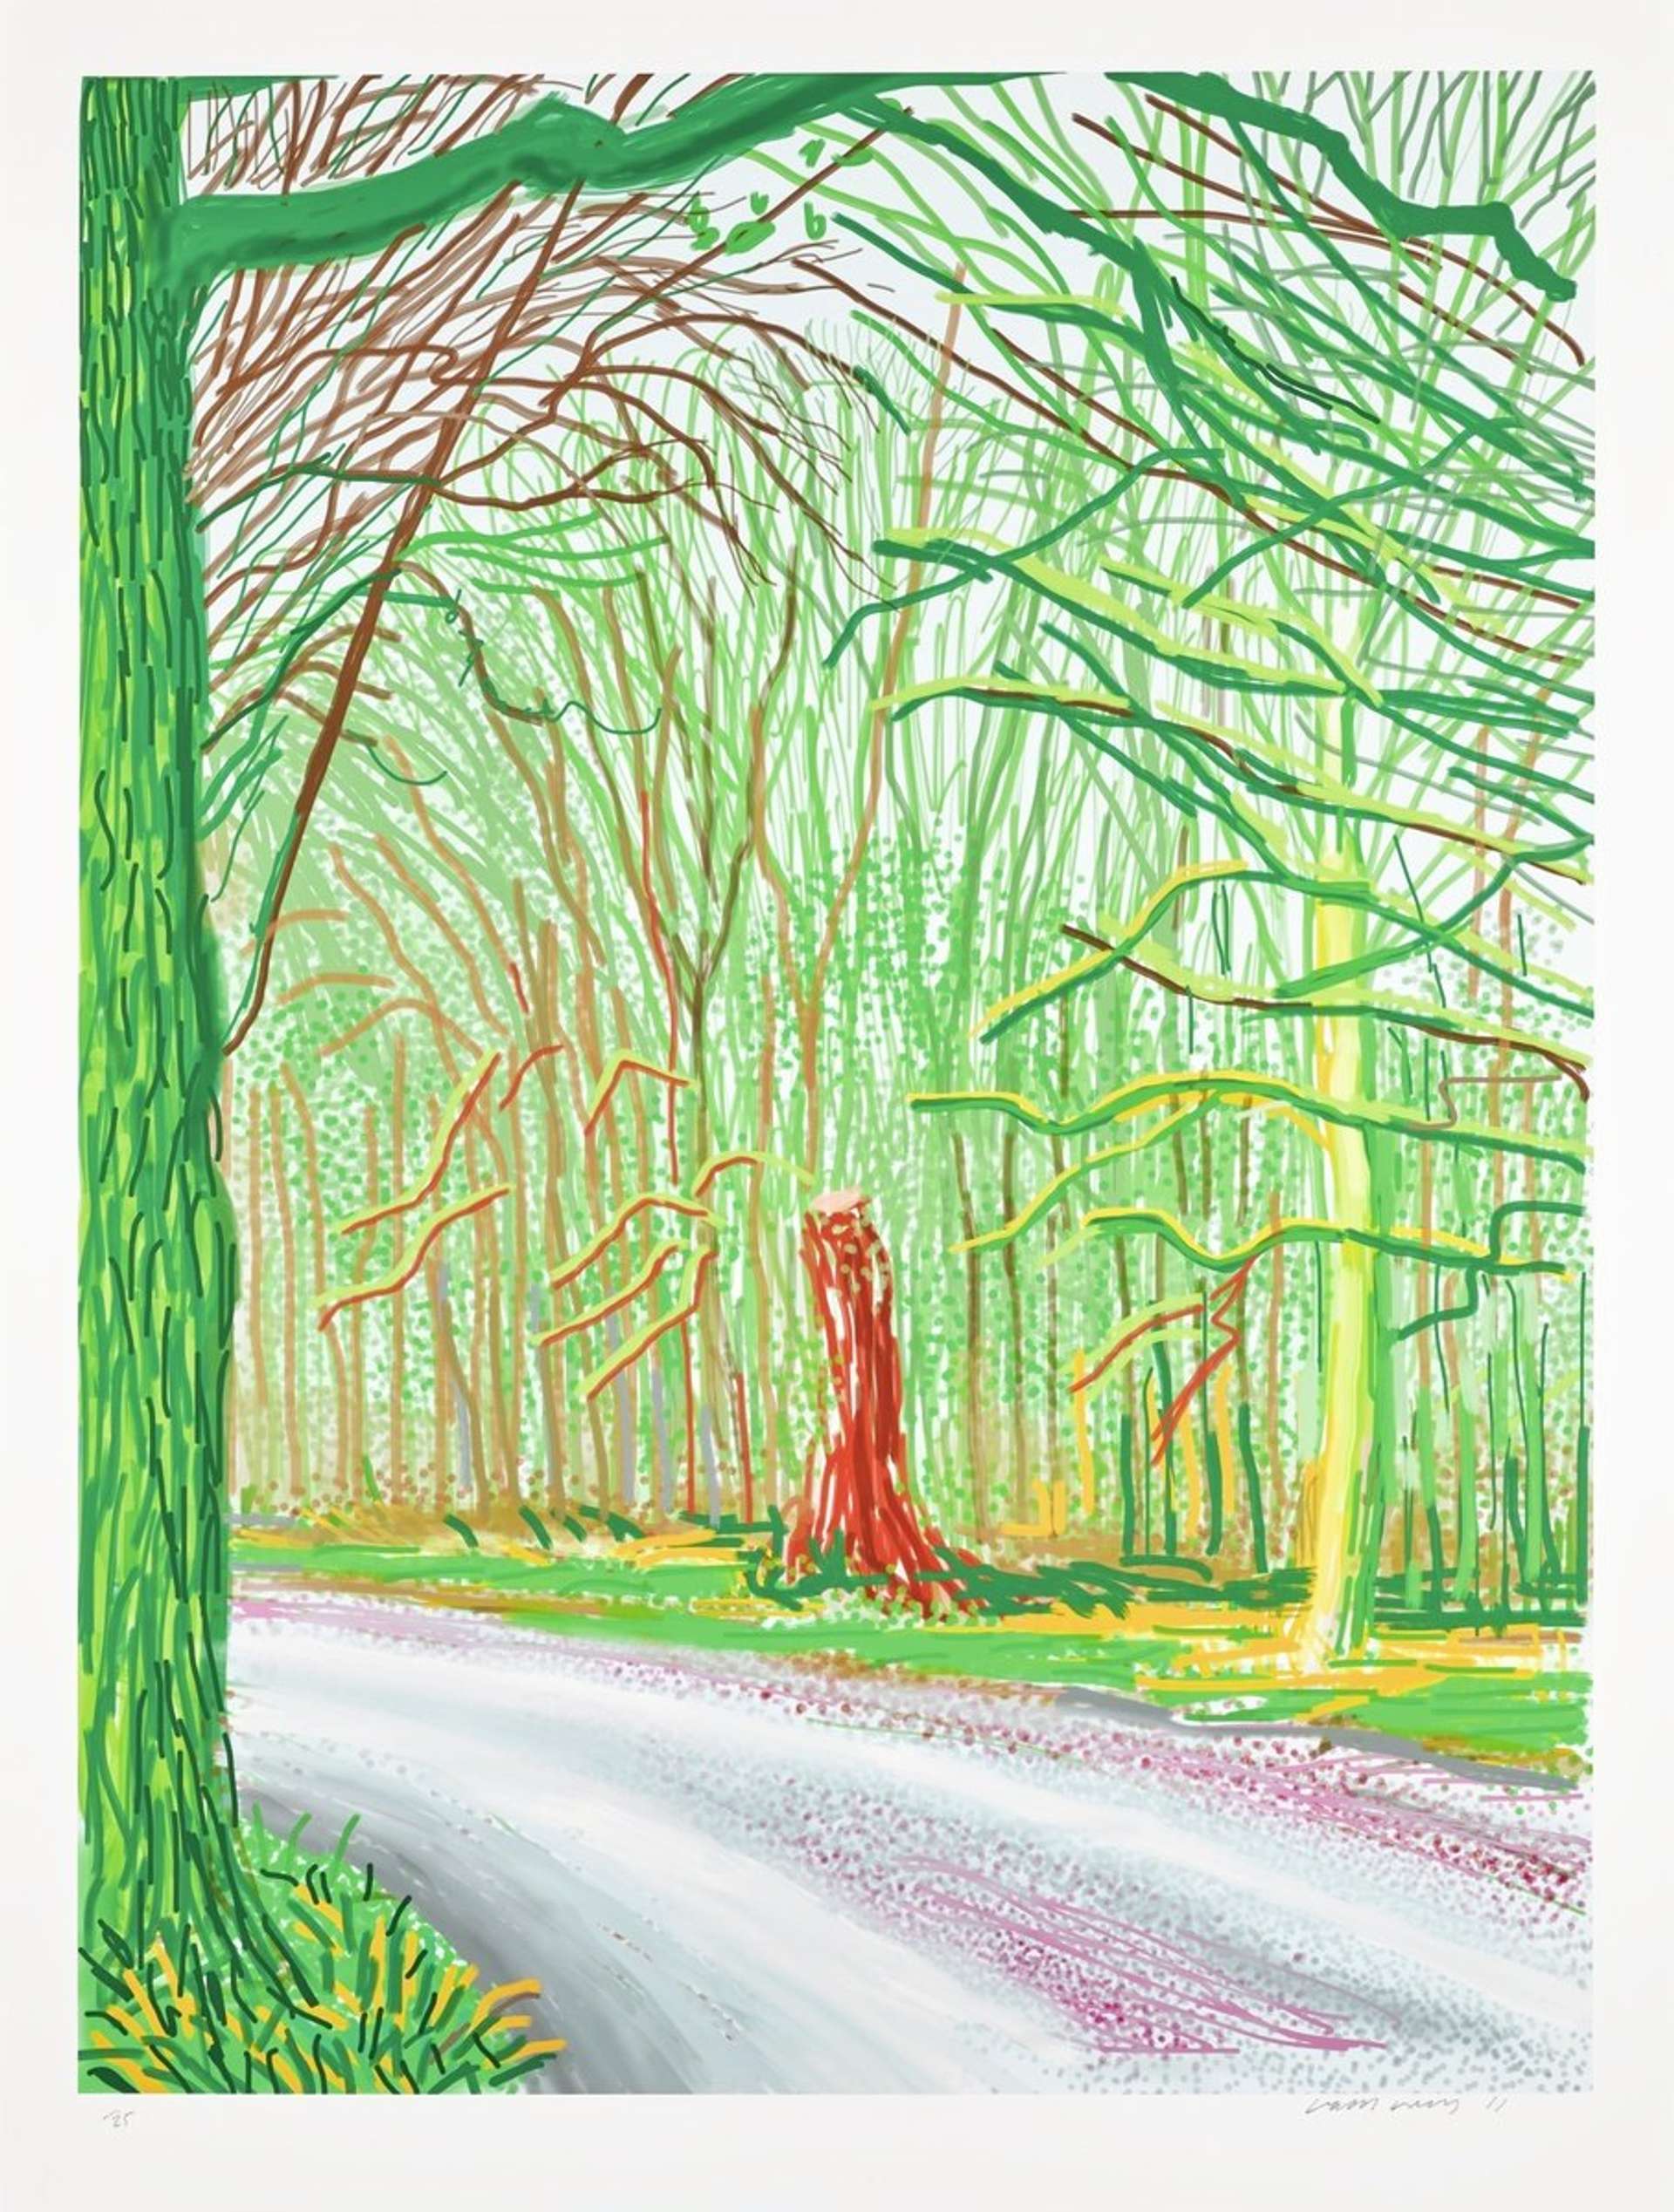 The Arrival Of Spring In Woldgate East Yorkshire 23rd April 2011 by David Hockney